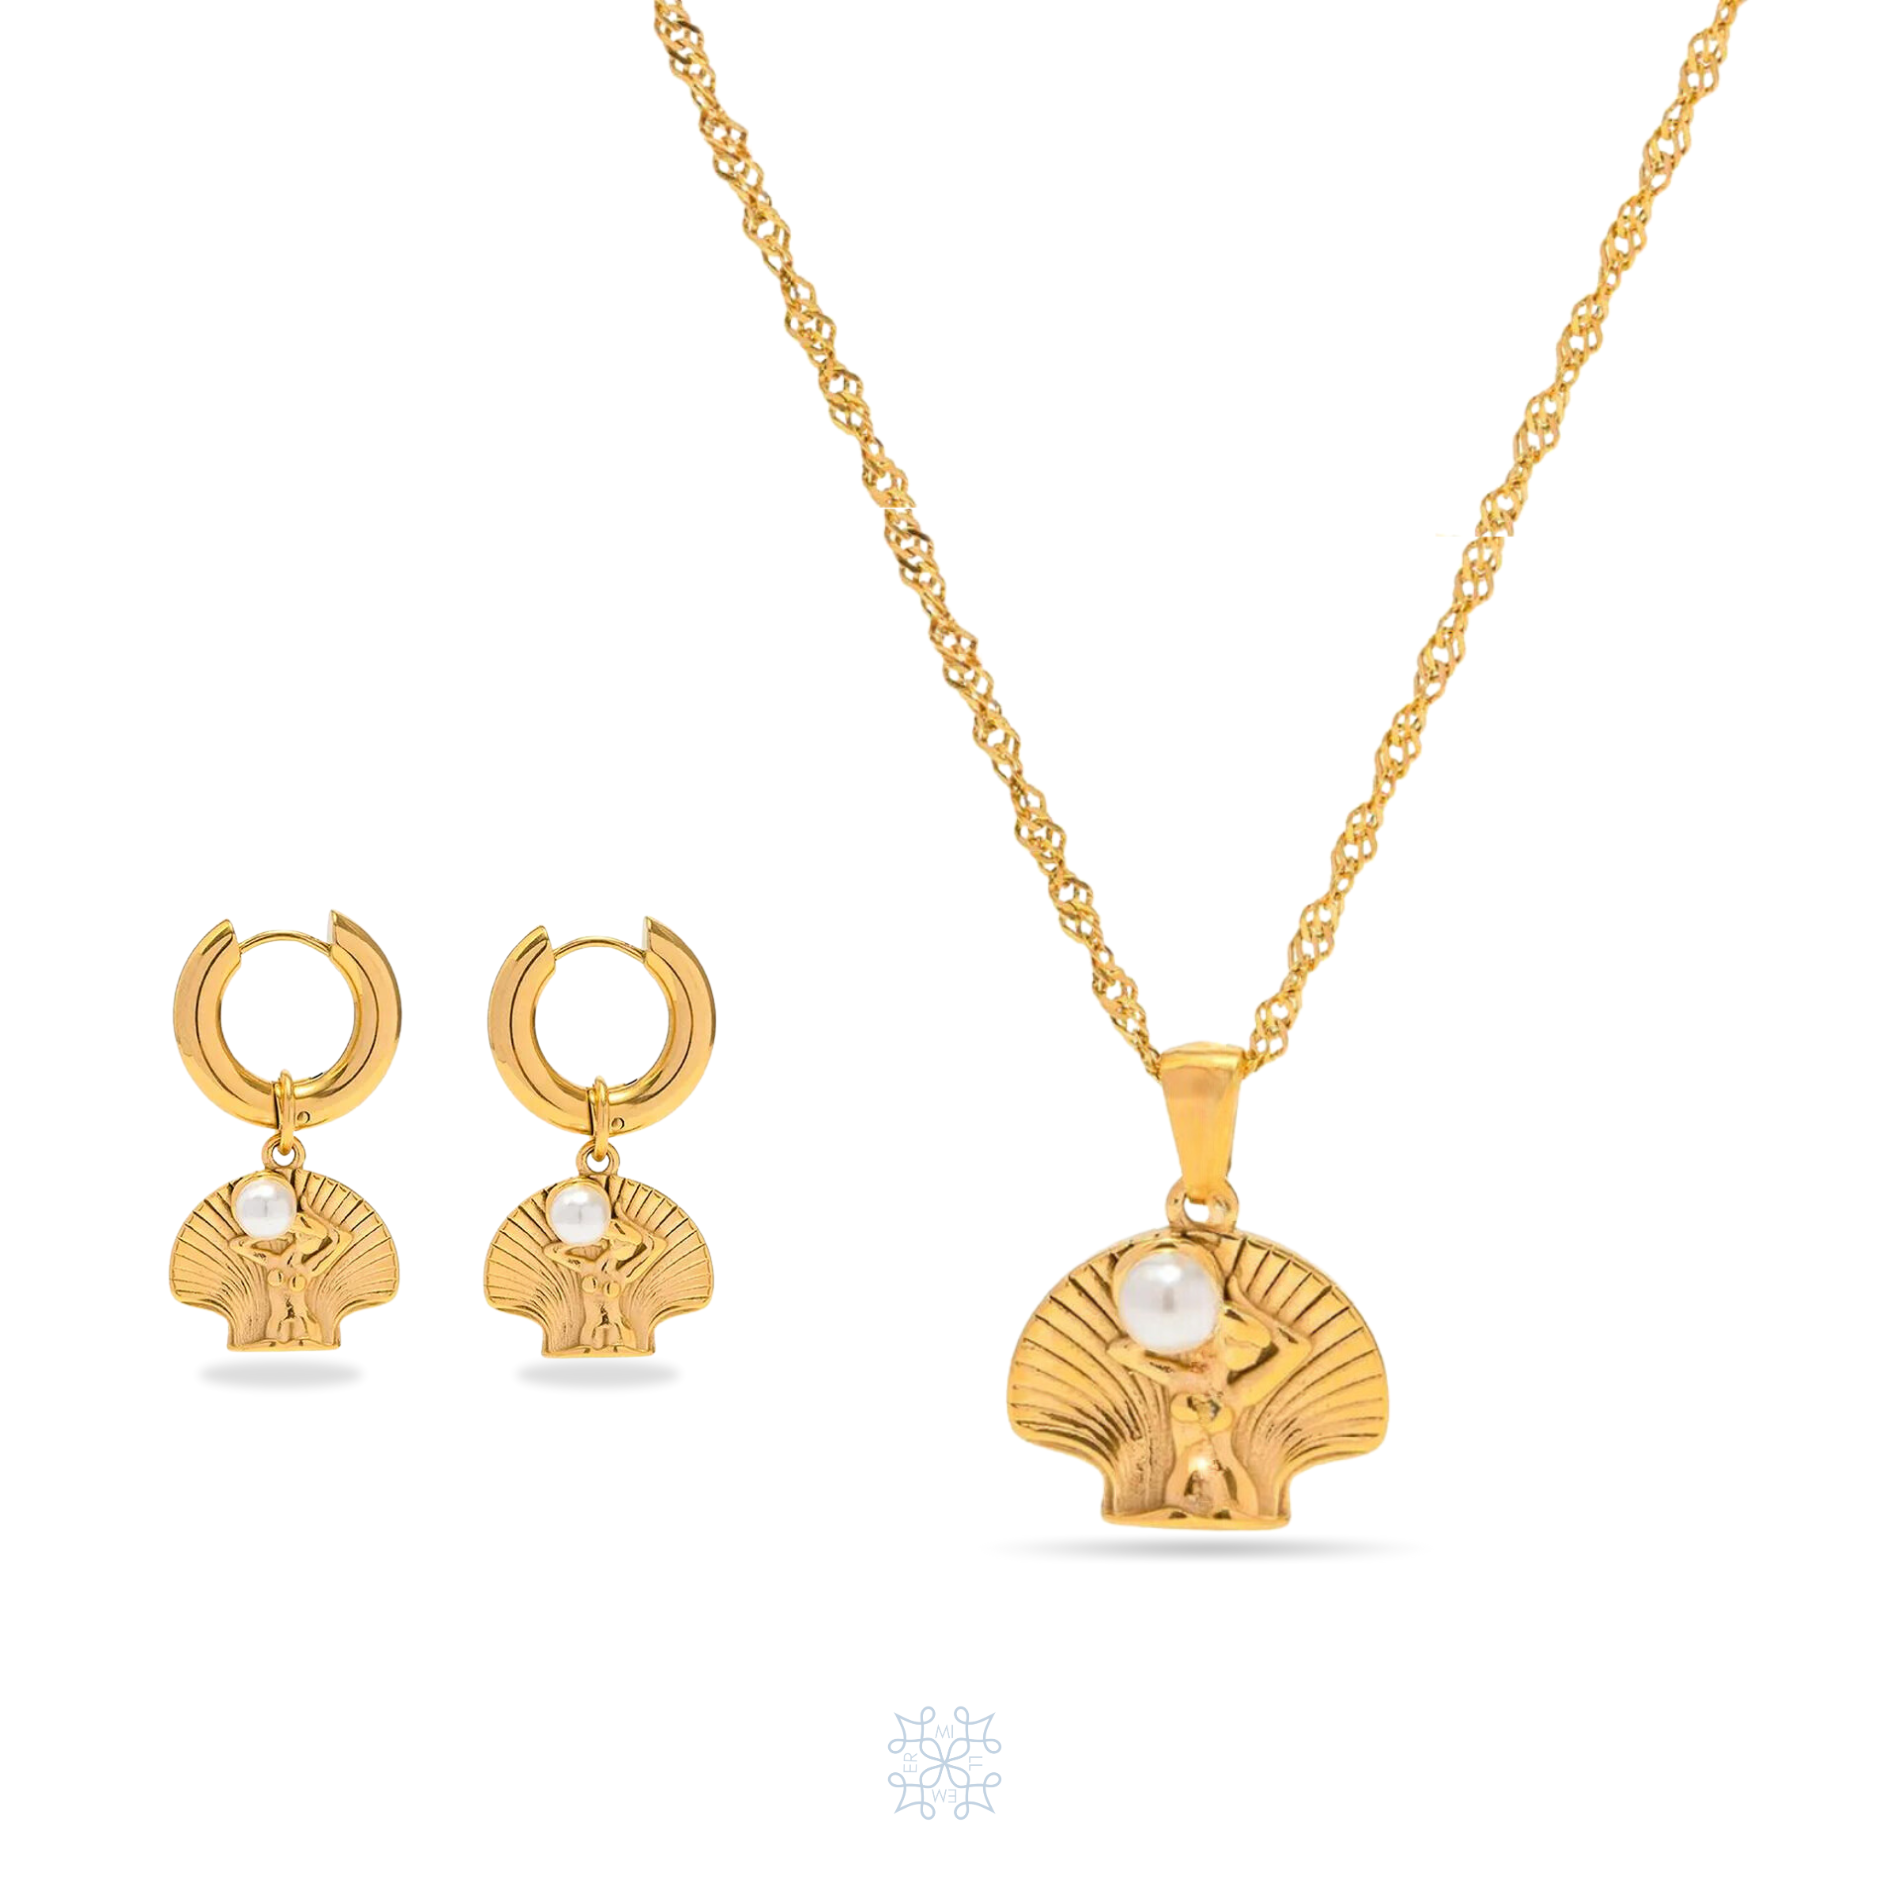 VENUS pearl gold set. Pair of earrings and chain shell pendant necklace. The shell necklace has the silohuete of e woman body holding a white pearl on her shoulders. The earrings have a gold shell drops with the silohuete of a woman engraved holding a white pearl on her shoulders. 